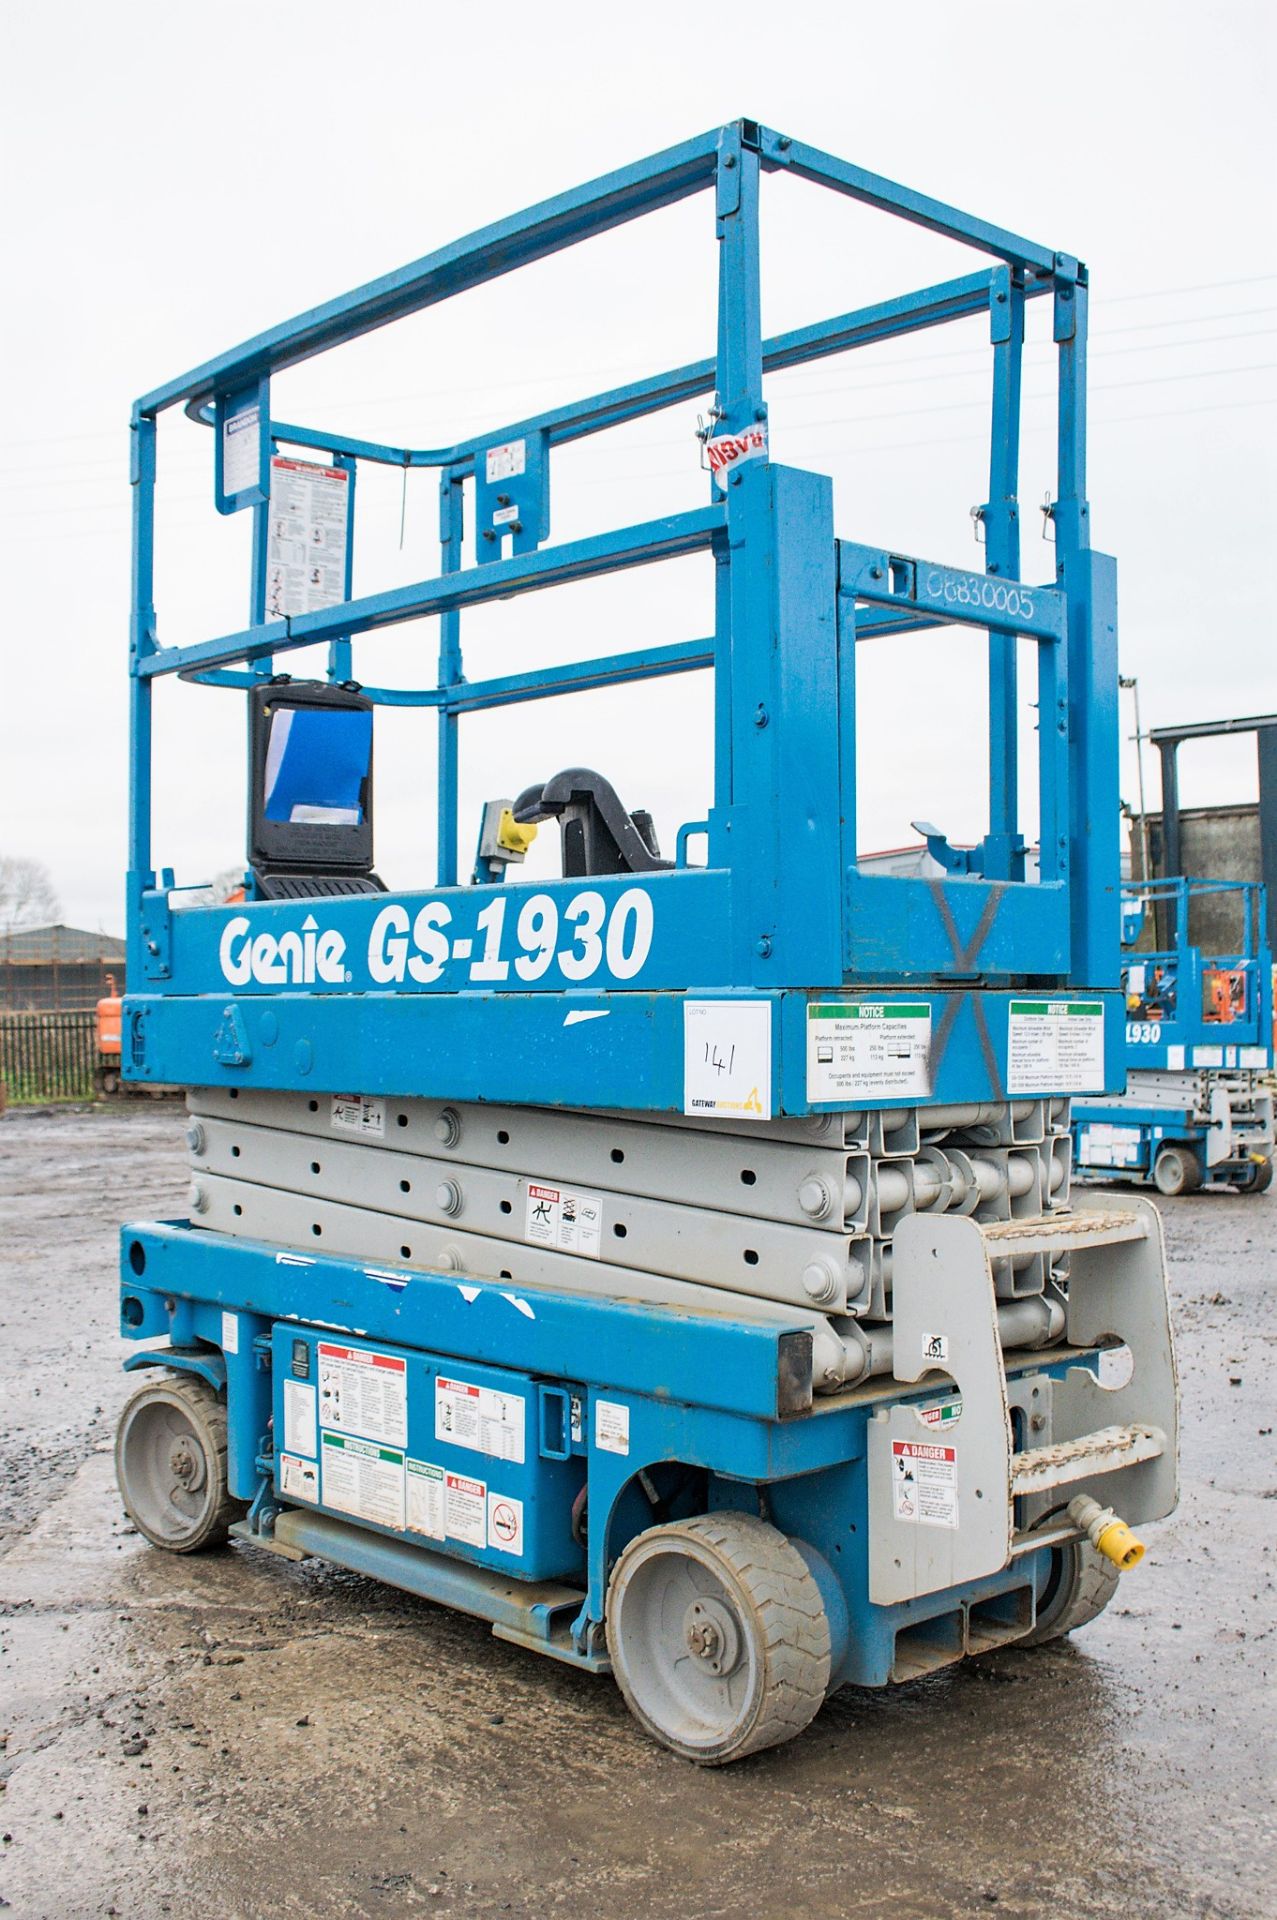 Genie GS1930 battery electric scissor lift Year: 2002 S/N: 54257 Recorded Hours: 516 0883-0005 - Image 4 of 8